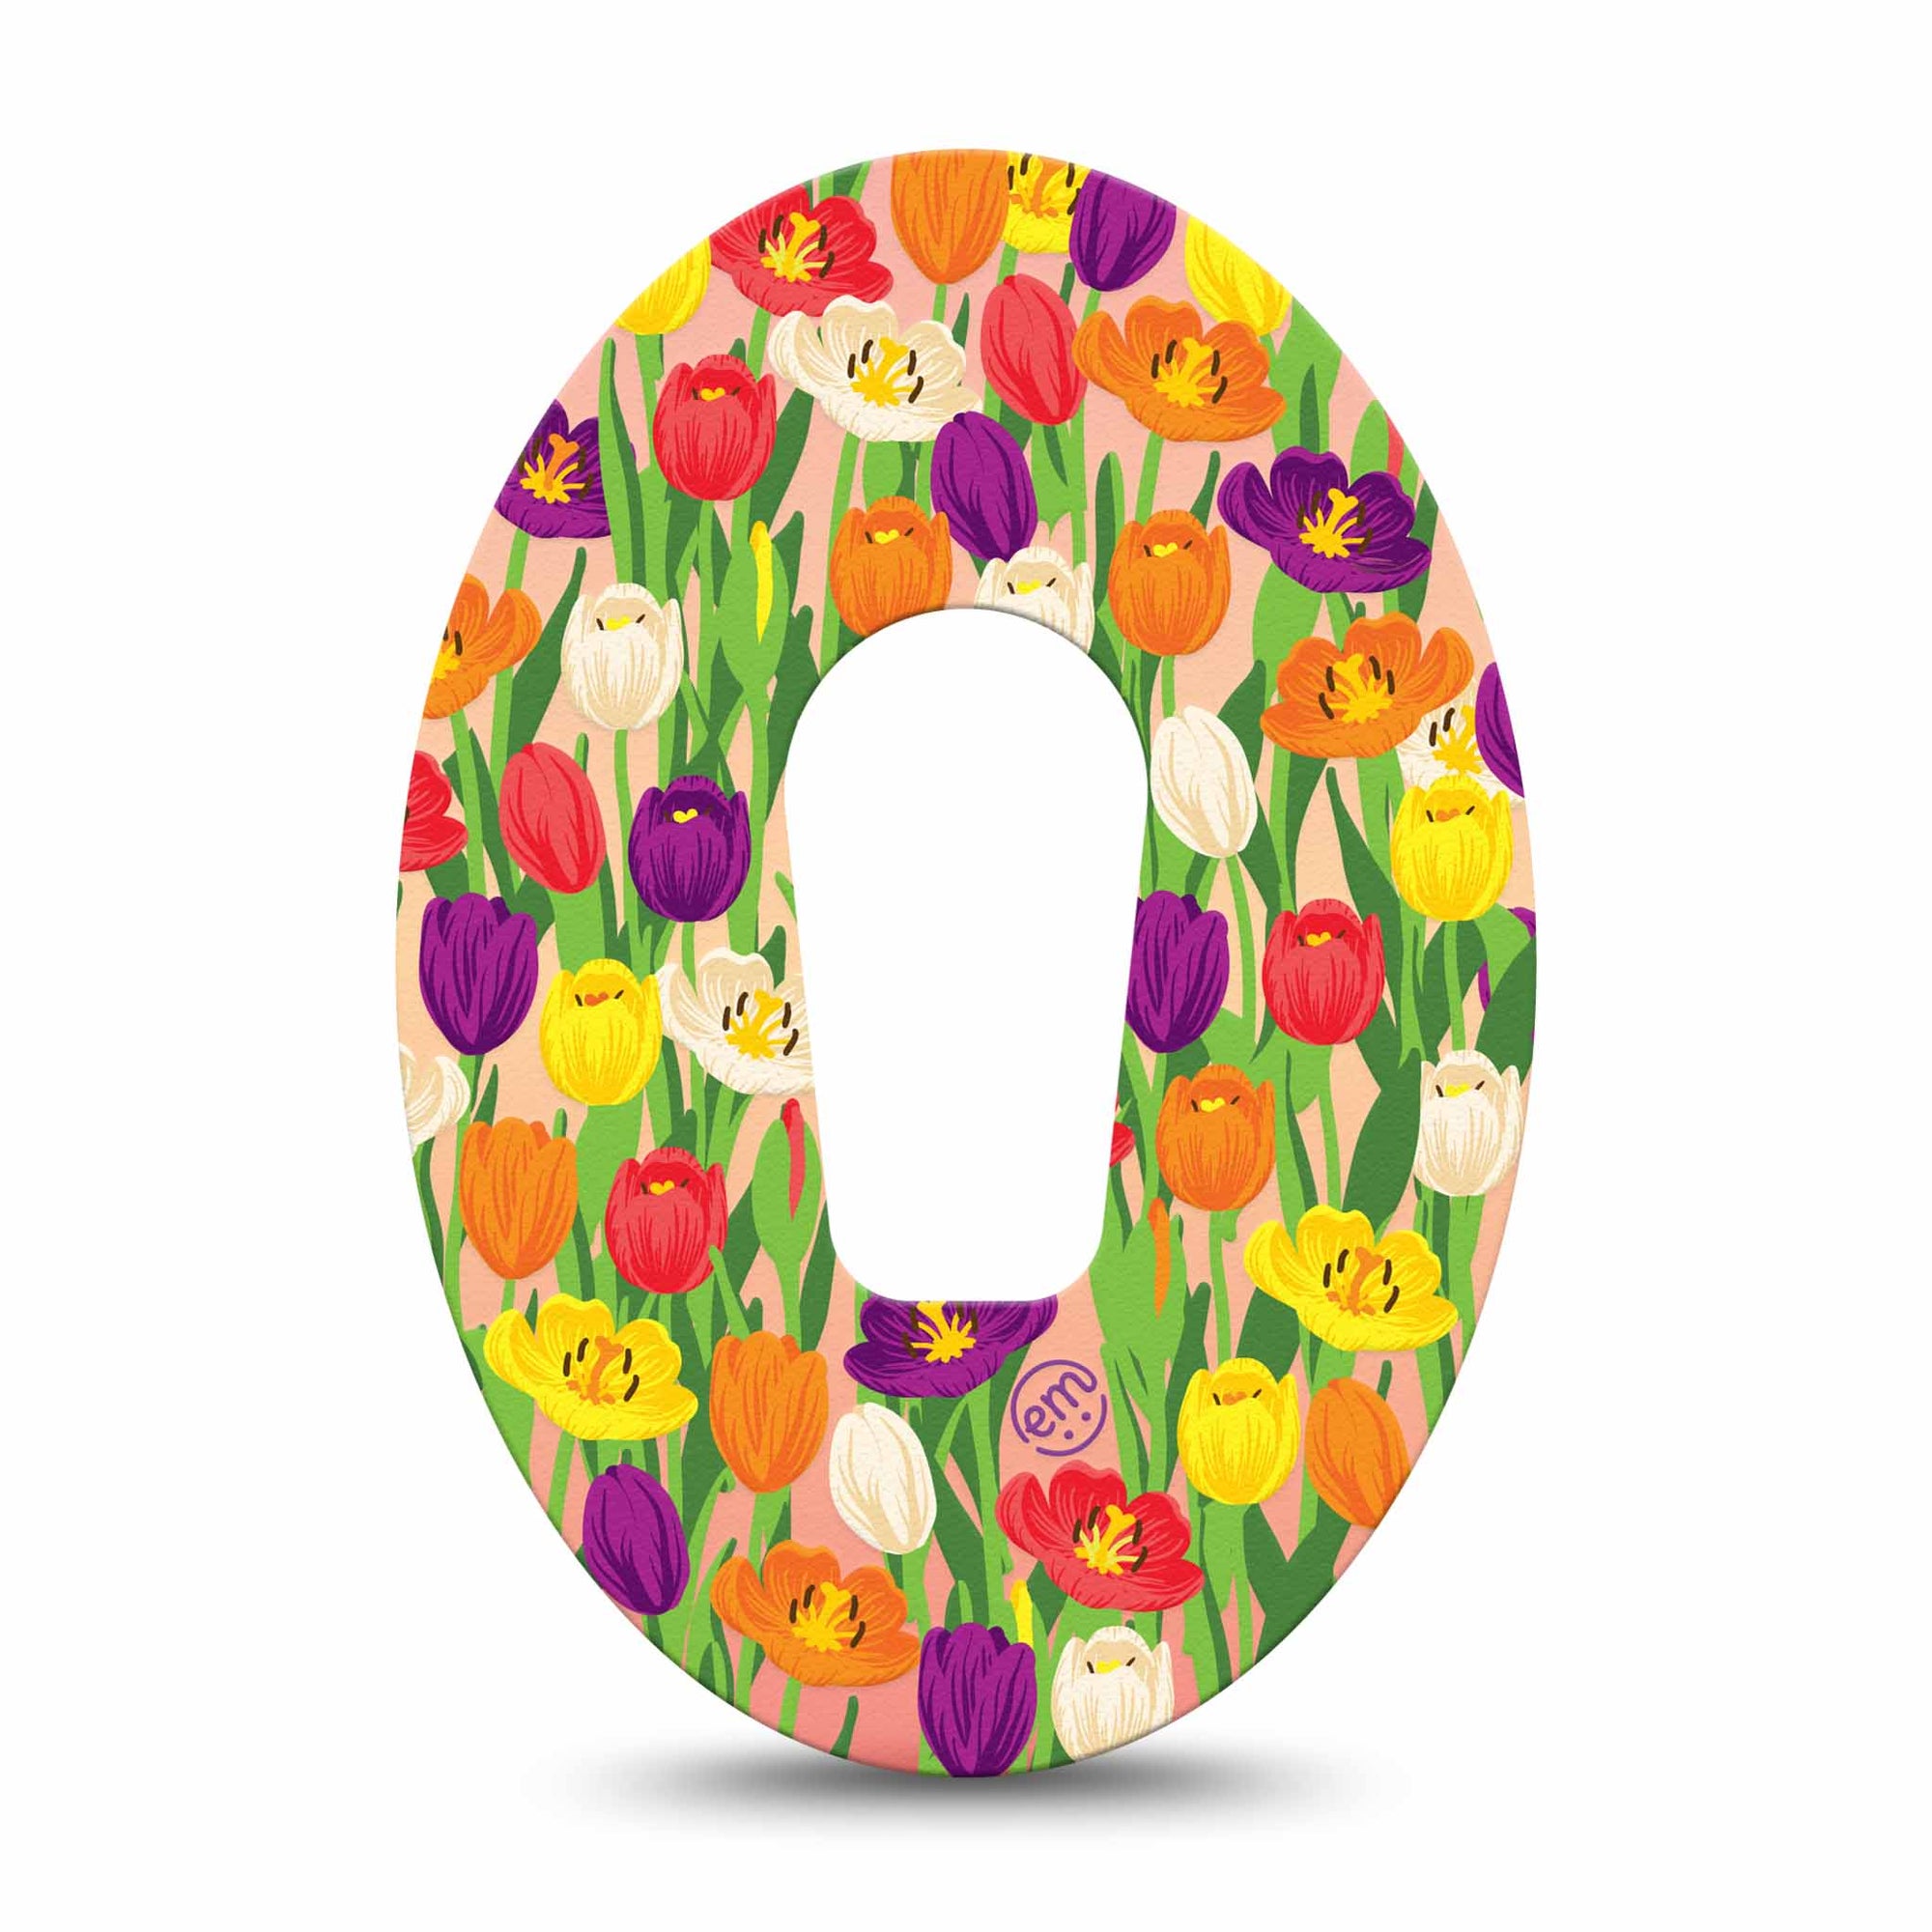 ExpressionMed Tulips Dexcom G6 Tape, Single, Colorful Spring Flowers Themed, CGM Overlay Patch Design